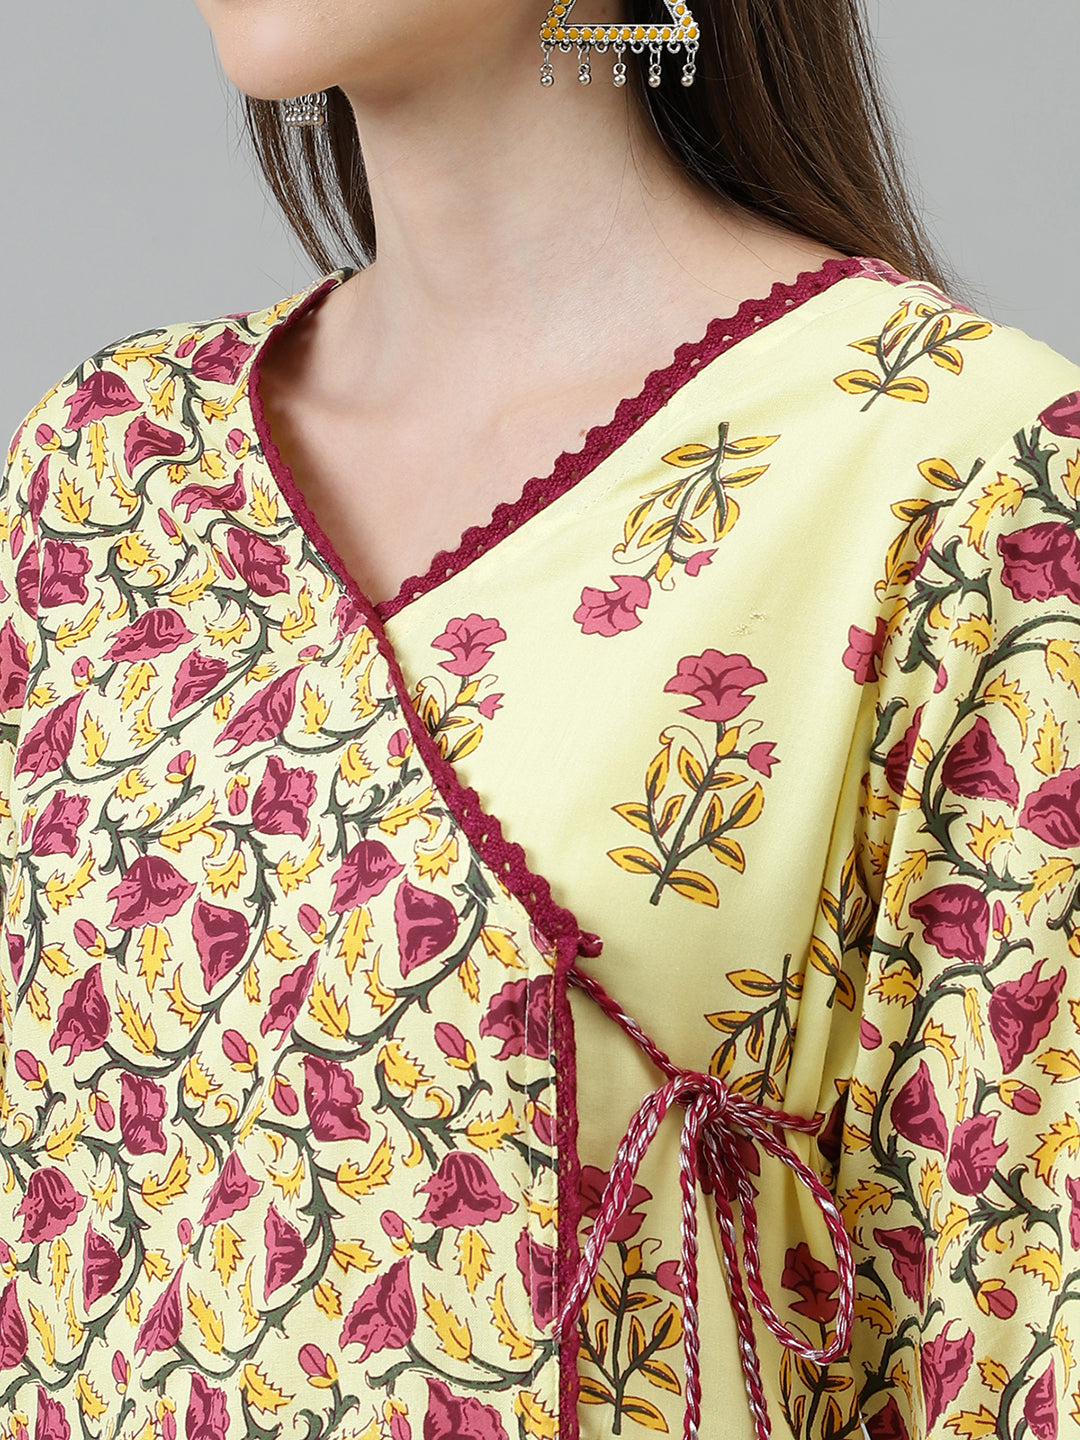 Women Yellow Floral Printed Kurta with Trousers and Dupatta